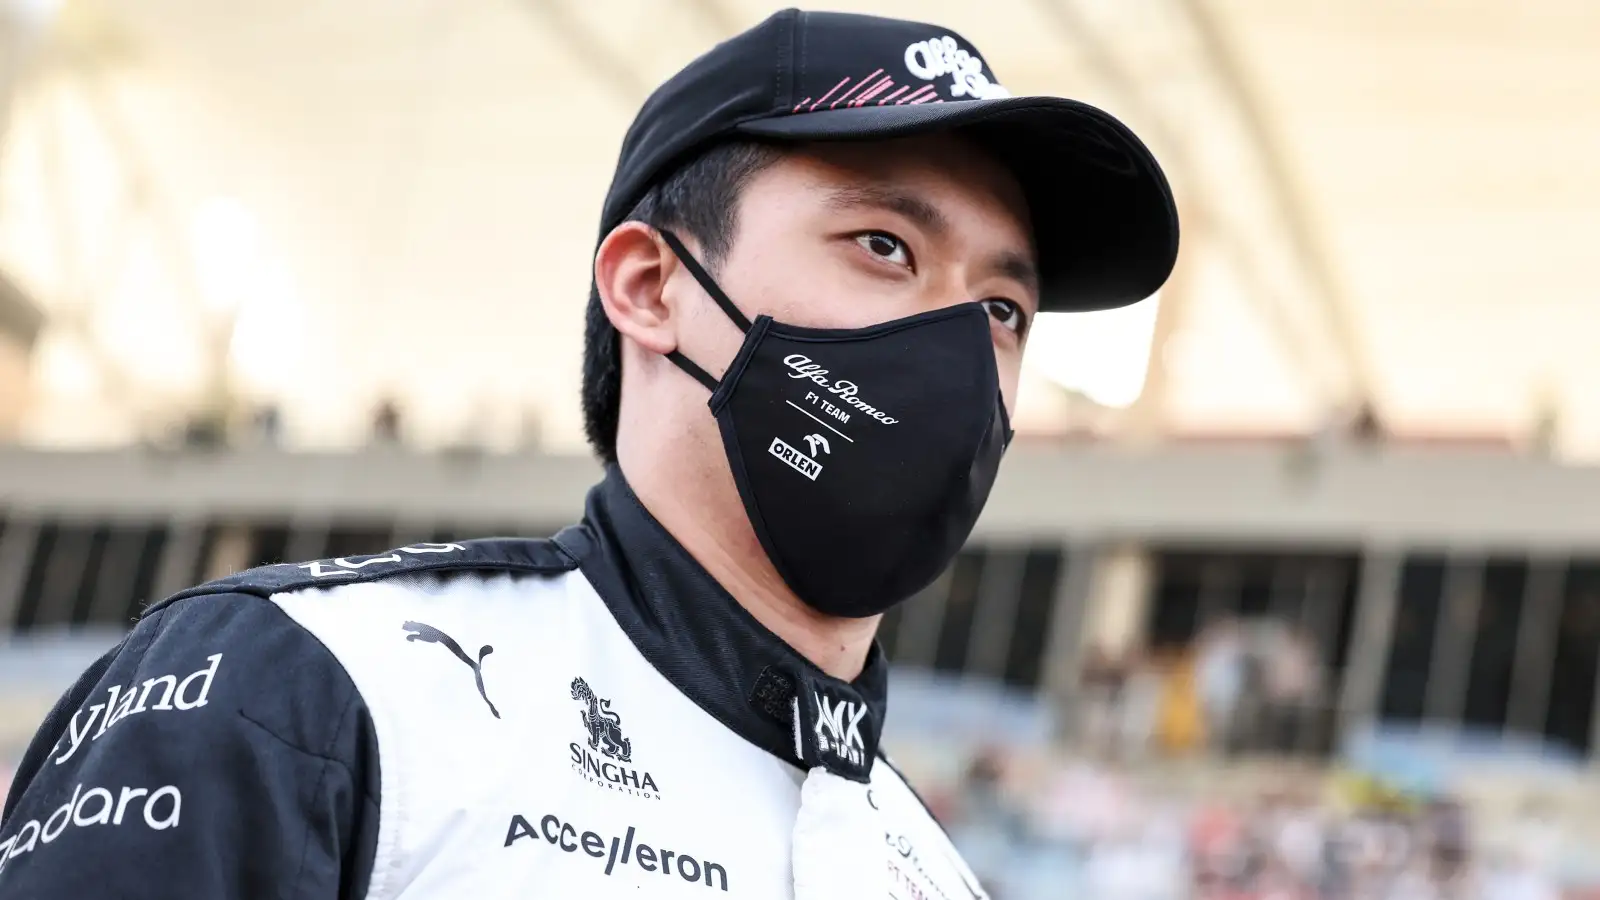 Zhou Guanyu in his Alfa Romeo race suit and mask. Bahrain, March 2022.